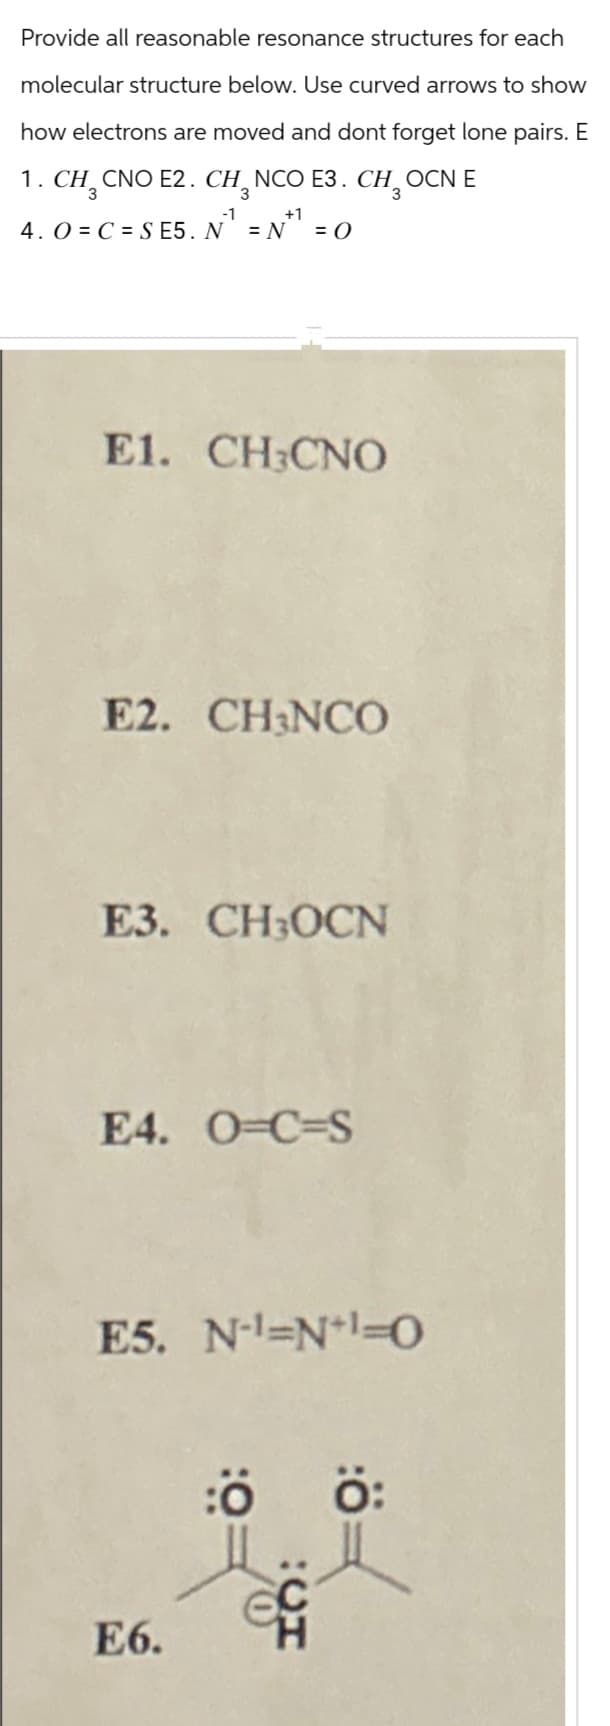 Provide all reasonable resonance structures for each
molecular structure below. Use curved arrows to show
how electrons are moved and dont forget lone pairs. E
1. CH3 CNO E2. CHỌN
-1
NCO E3. CHOCN E
+1
4. O C S E5. N = N = O
E1. CH CNO
E2. CH3NCO
E3. CH₂OCN
E4. O-C-S
E5. N-1=N+1=0
E6.
CH
H₂O